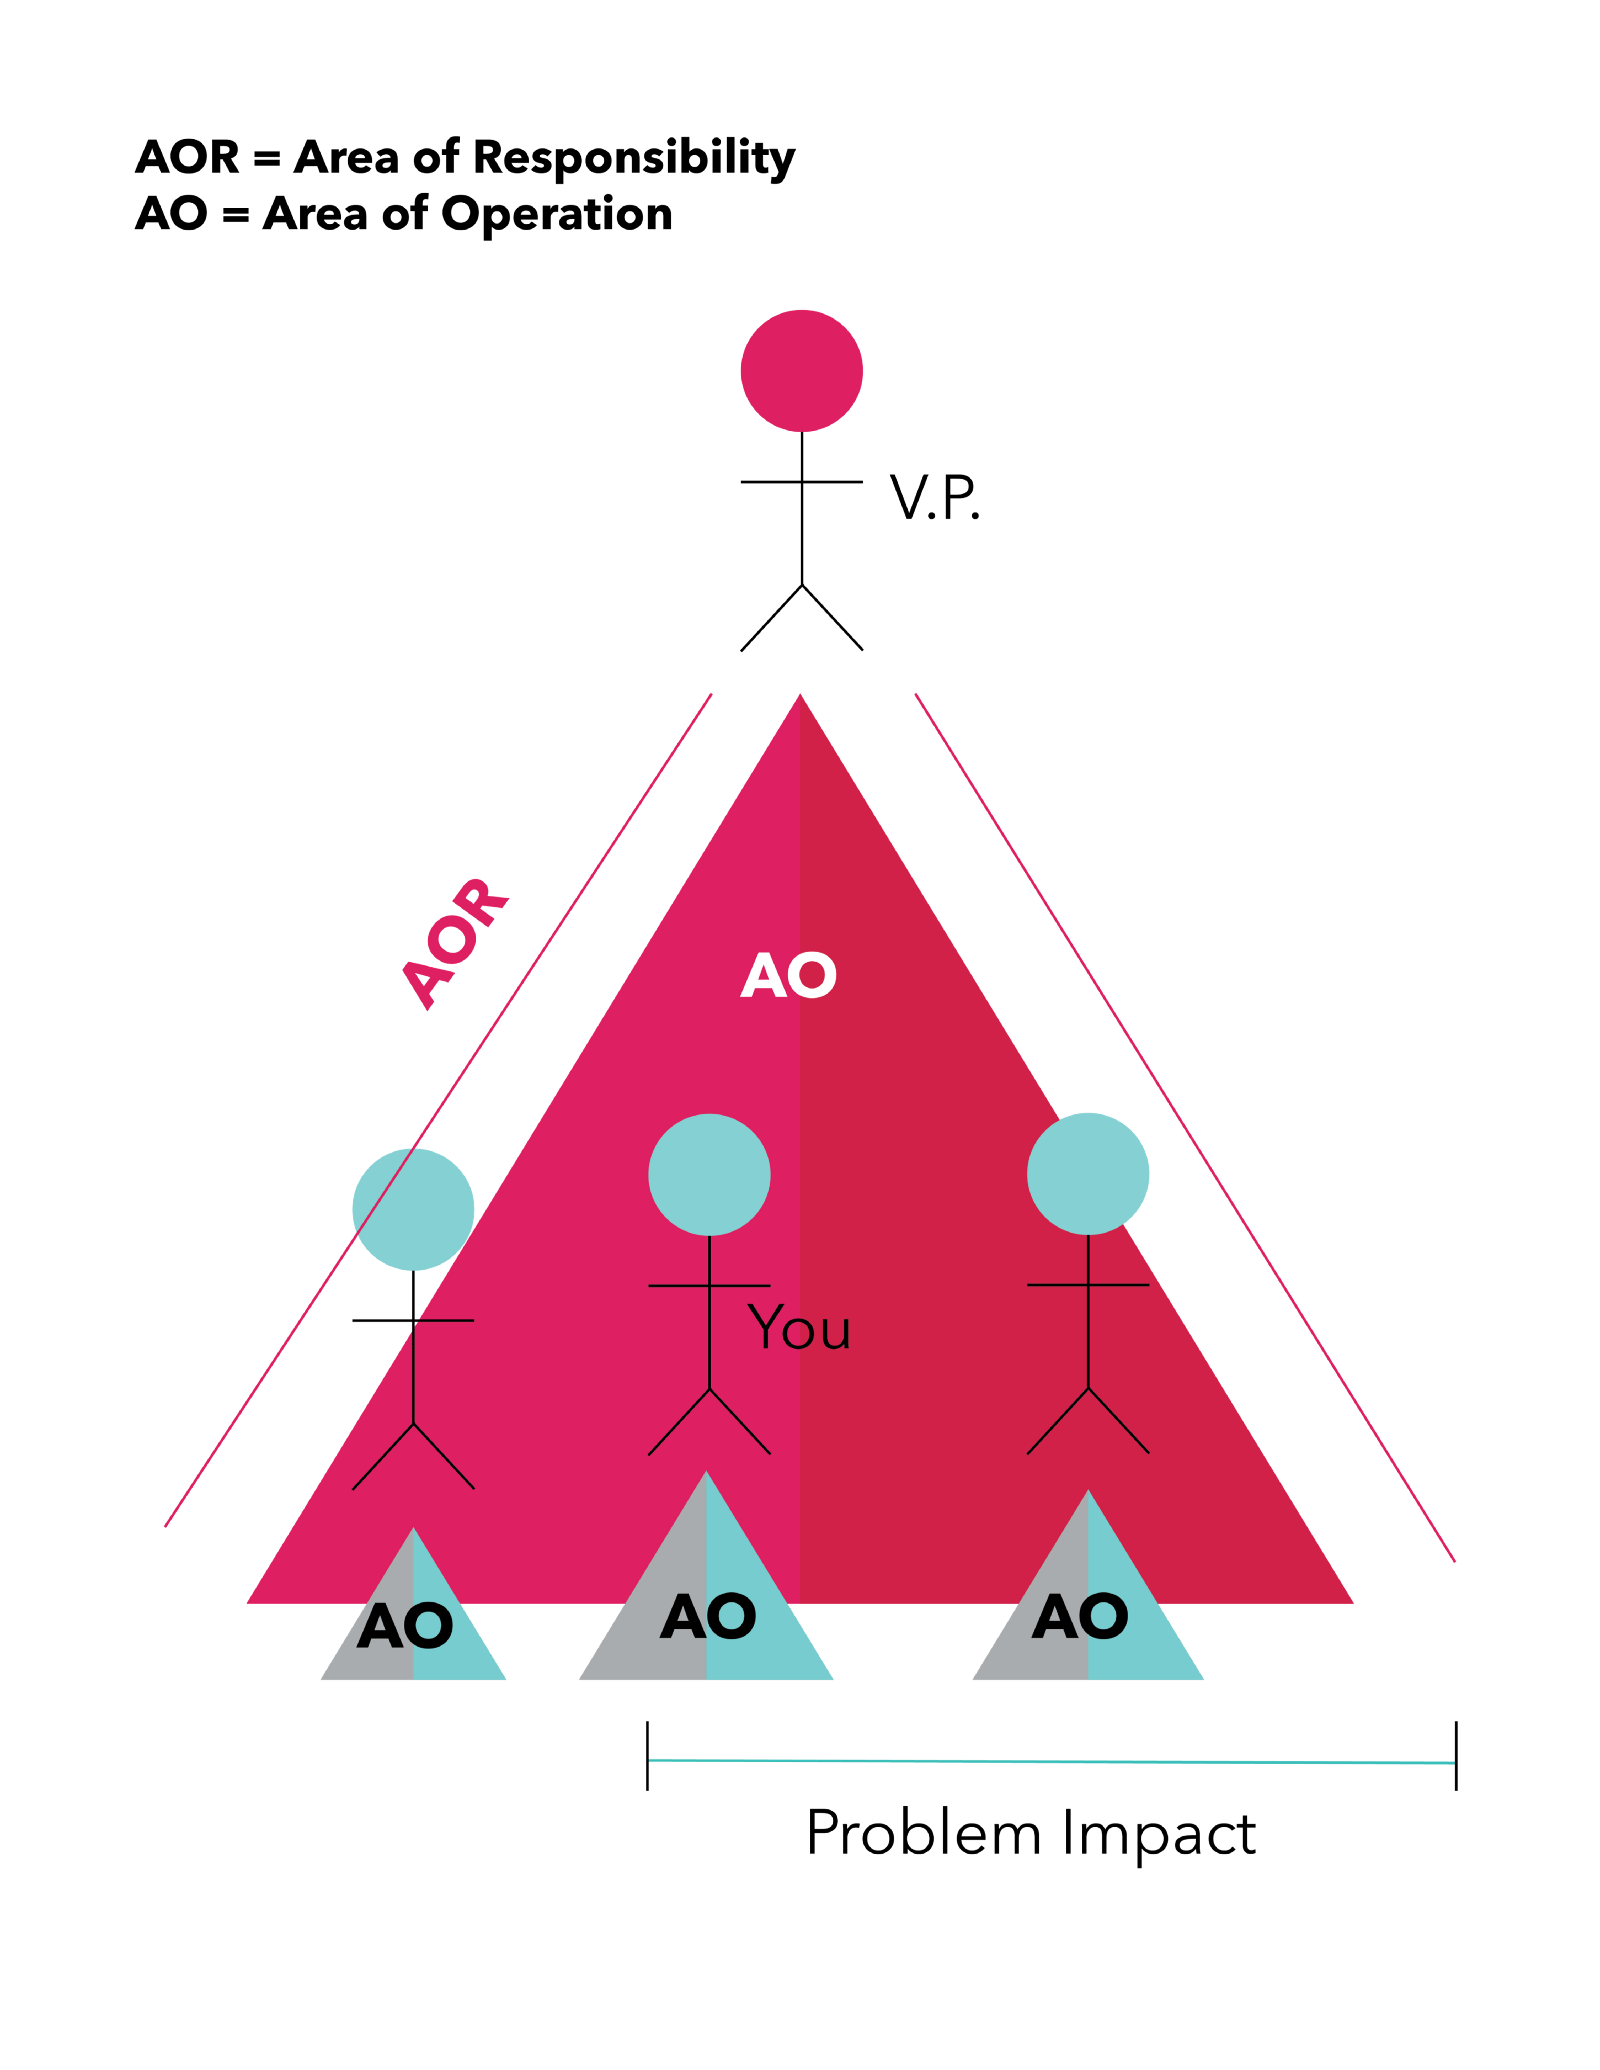 Area of Responsibility graphic. One person at the top of a pyramid, three people below on the bottom of the pyramid. The person at the top is the V.P. Their AOR is the entire pyramid. The people on the bottom have smaller AOR's below them.